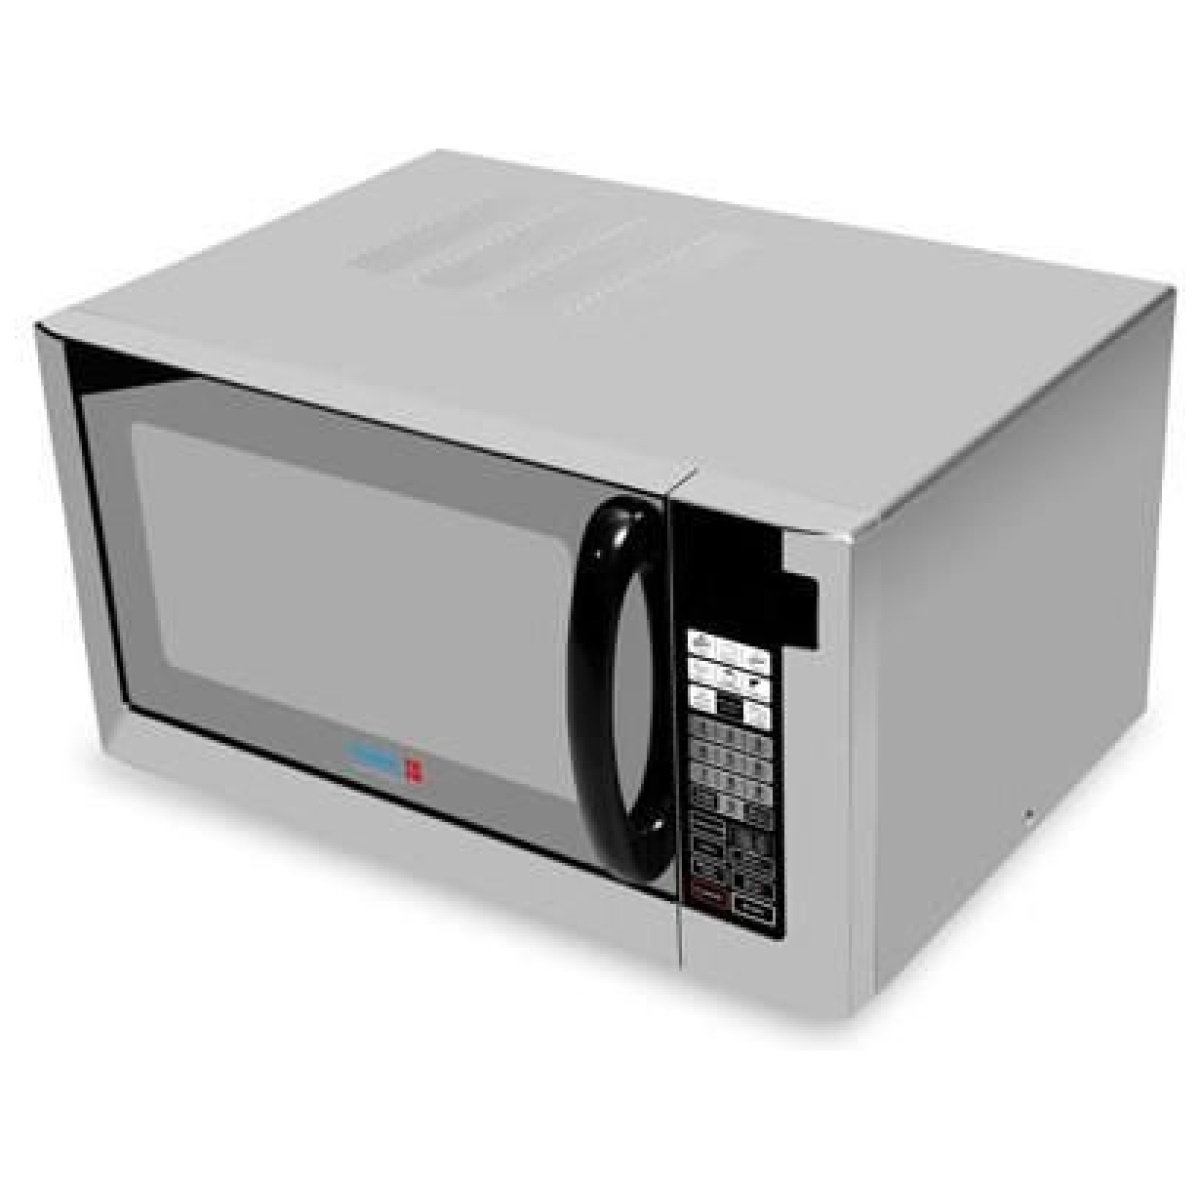 Scanfrost SF30-SSDGC - 30 LITERS Microwave WITH GRILL AND CONVECTION